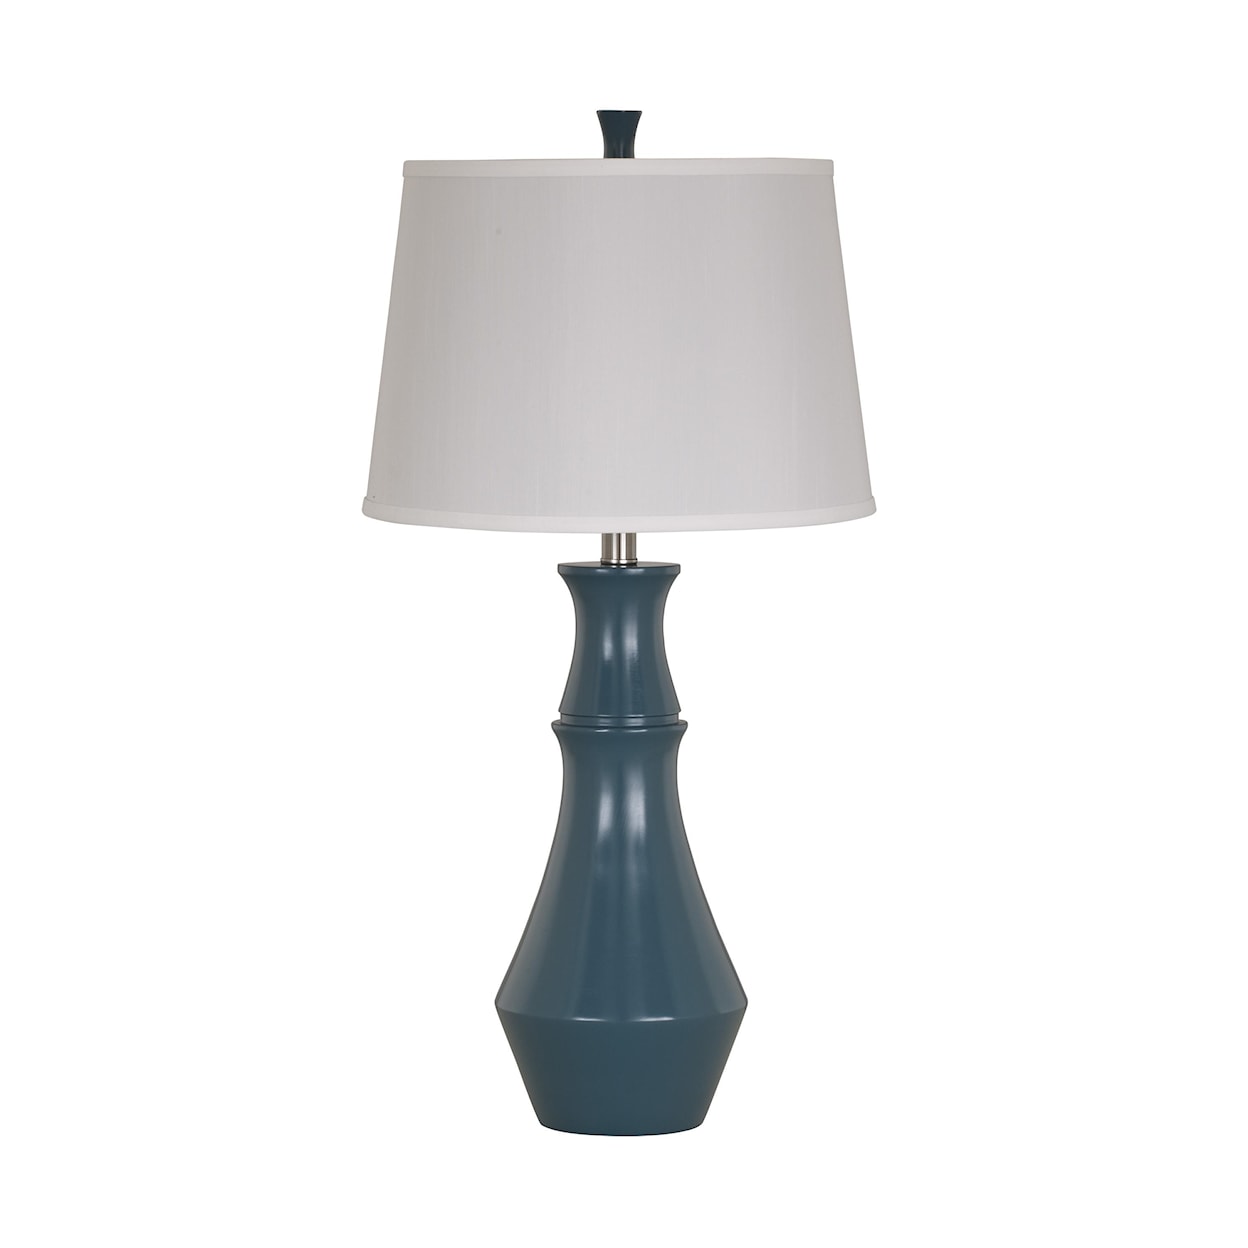 Ashley Furniture Signature Design Lamps - Contemporary Set of 2 Sirilla Blue Poly Table Lamps